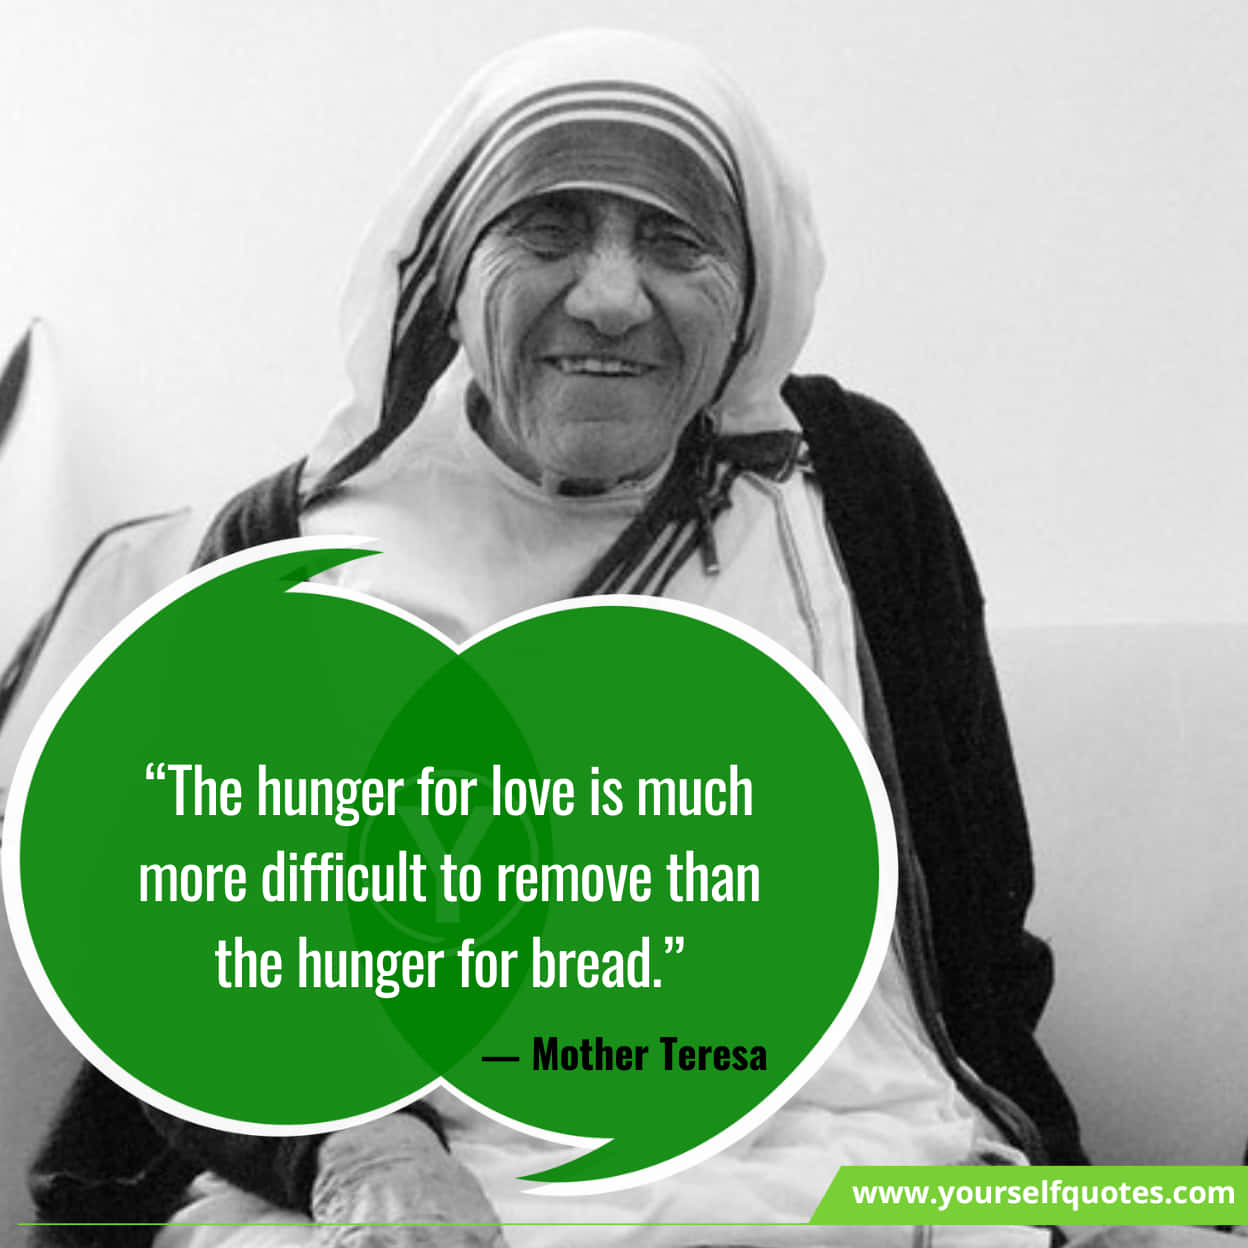 Inspiring Mother Teresa Quotes On Happiness